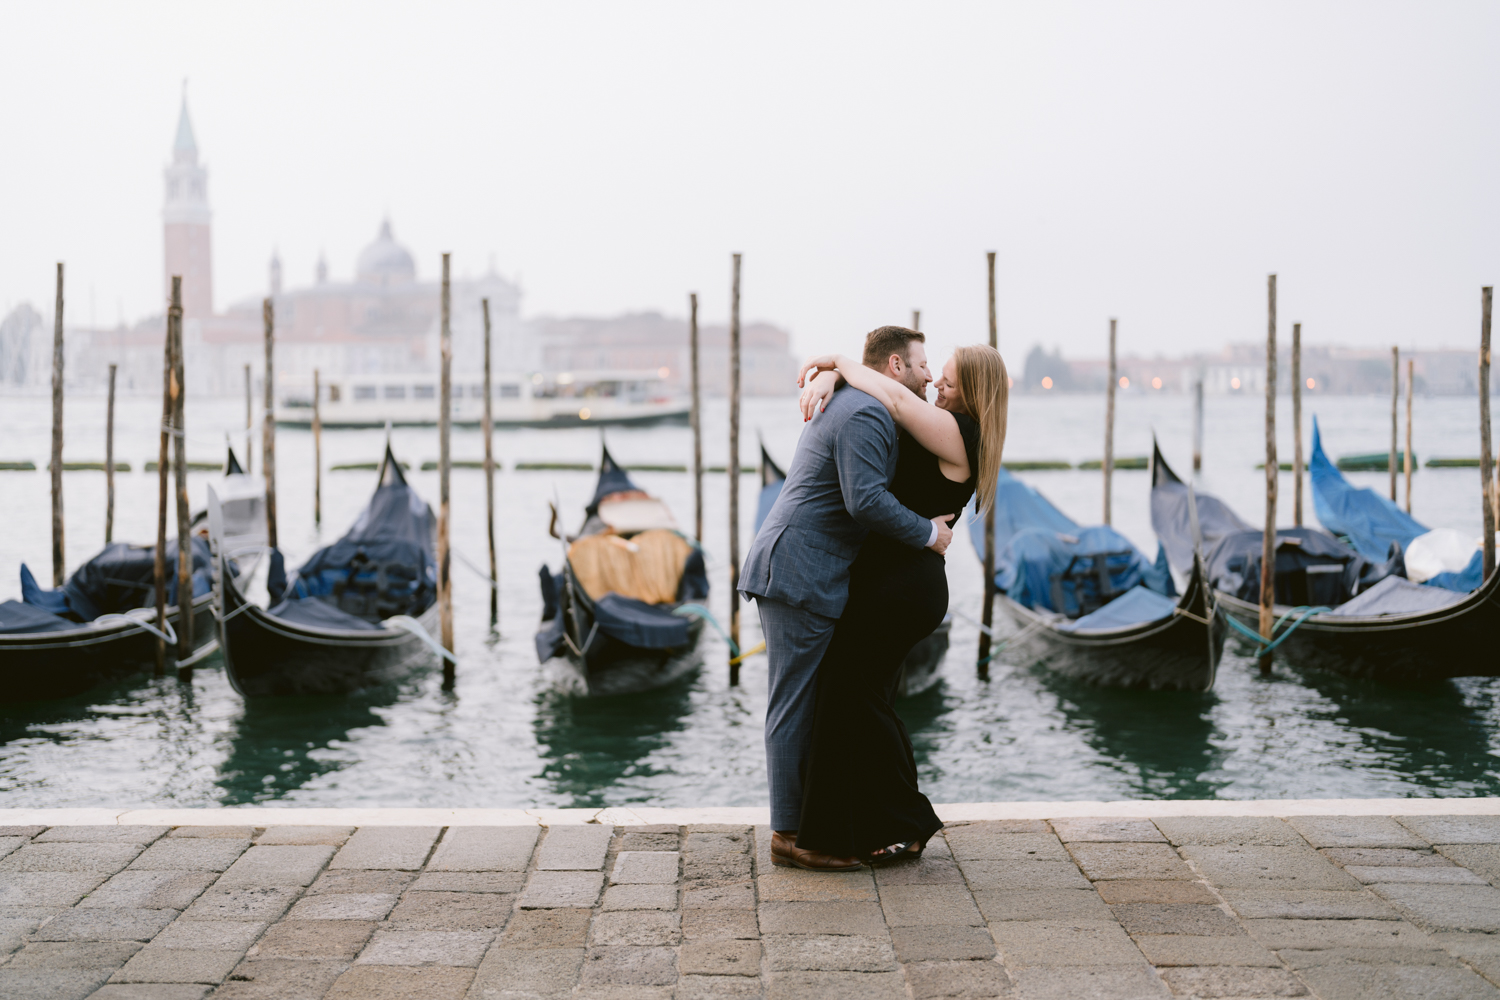 The best locations for a romantic honeymoon, anniversary, wedding, elopement, proposal sunrise photoshoot in Venice